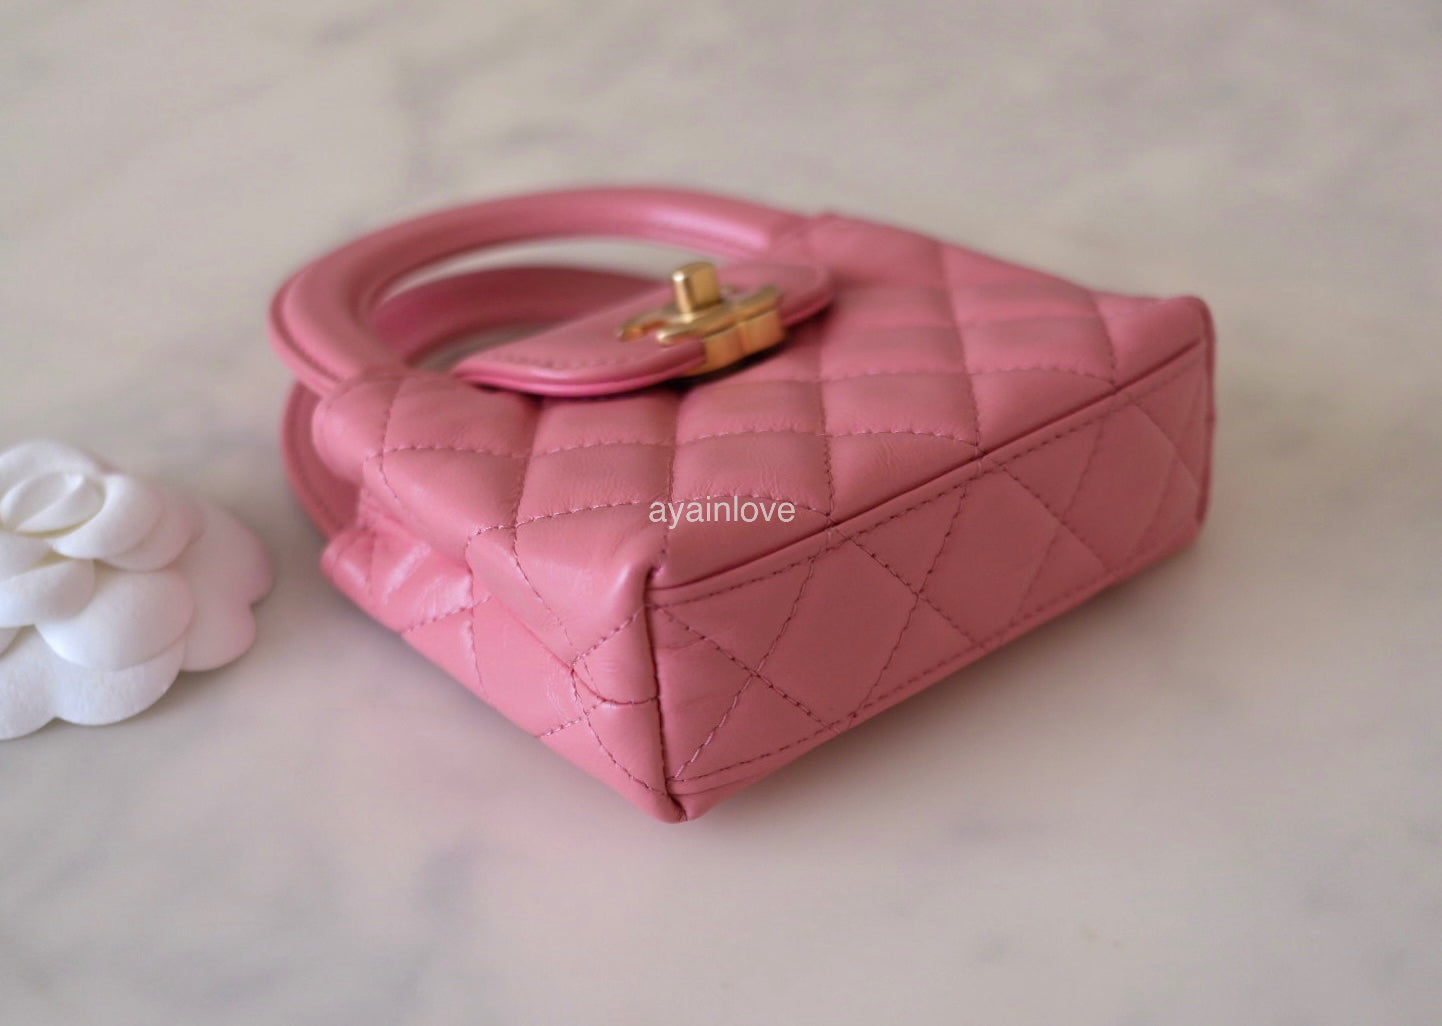 Pale Pink Patent Ring Chain Clutch Bag